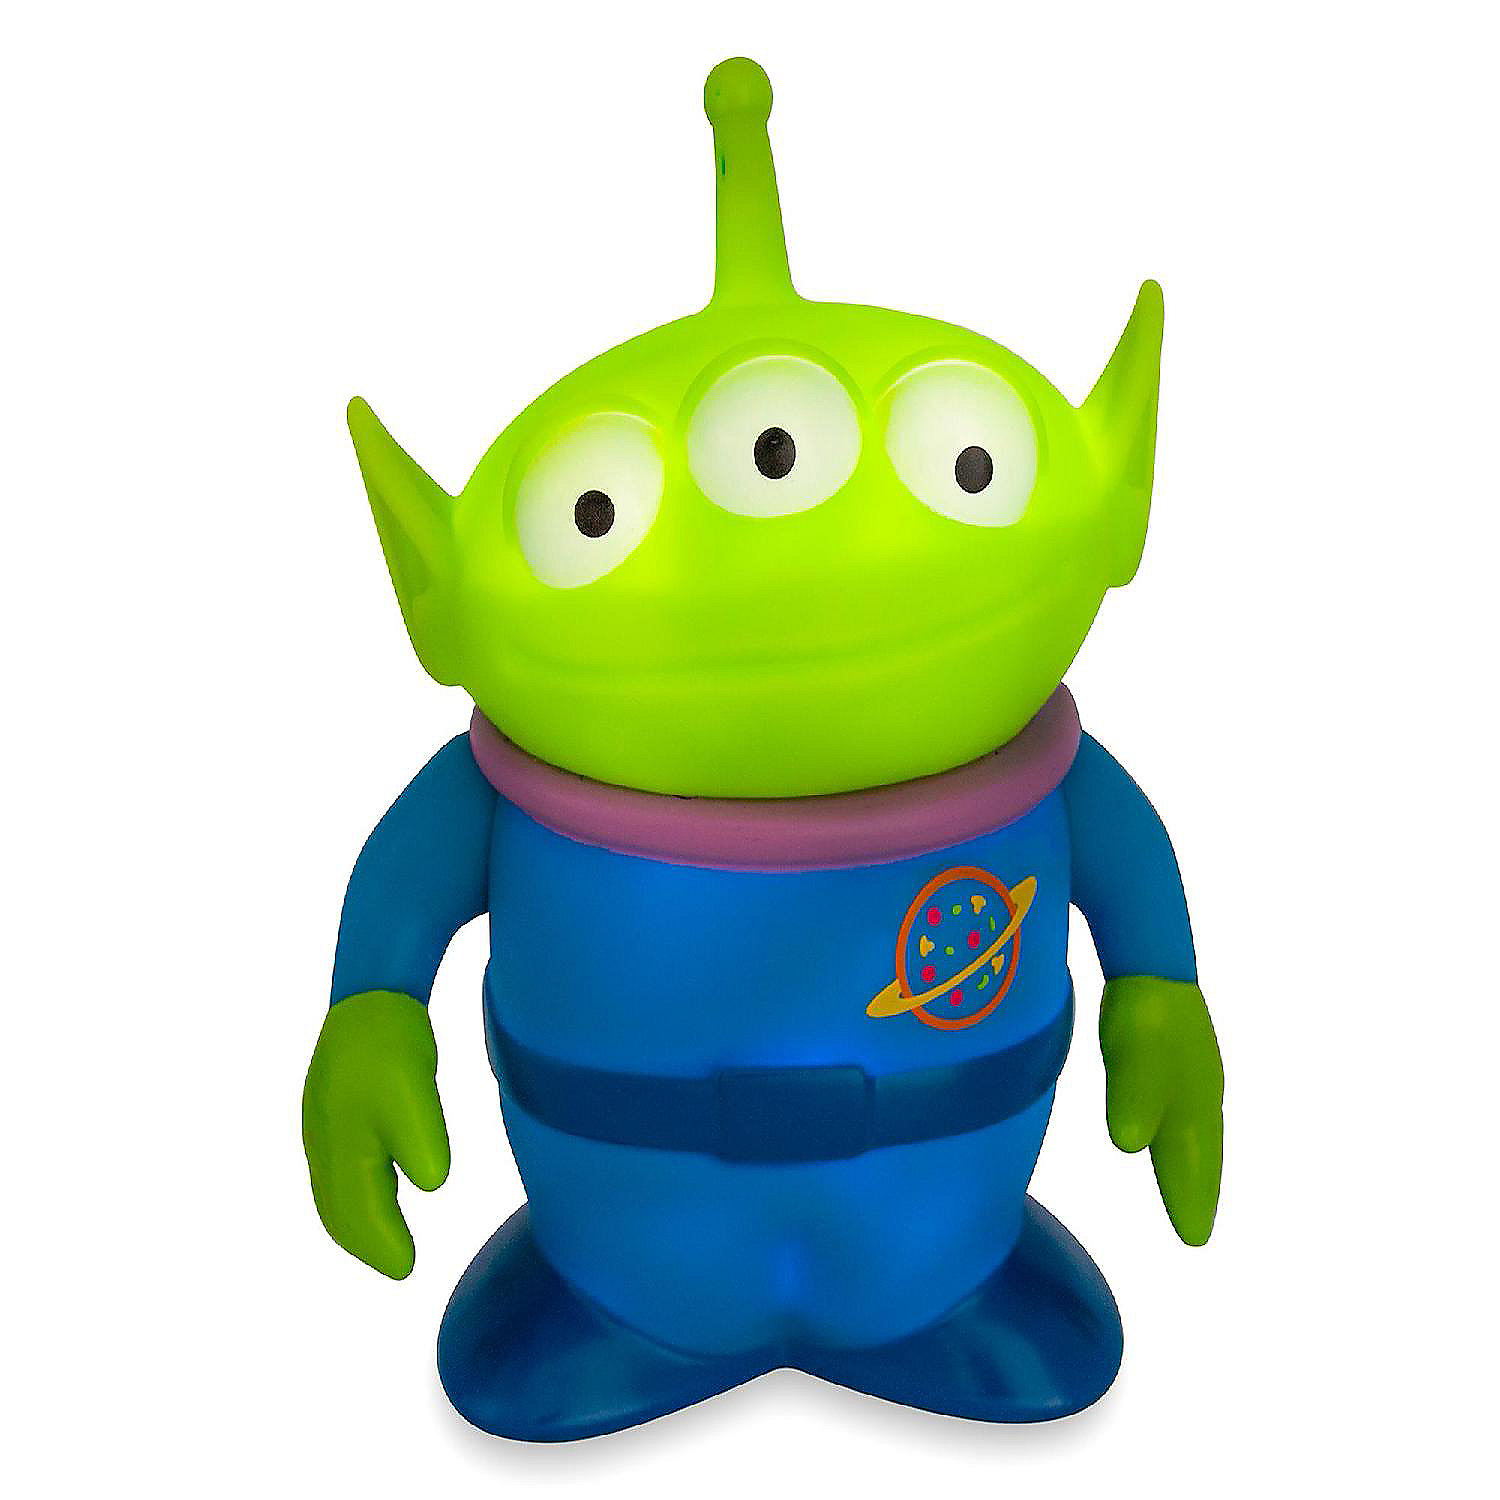 Disney Pixar Toy Story 4 Pizza Planet Alien Figural Mood Light 6 Inches Tall